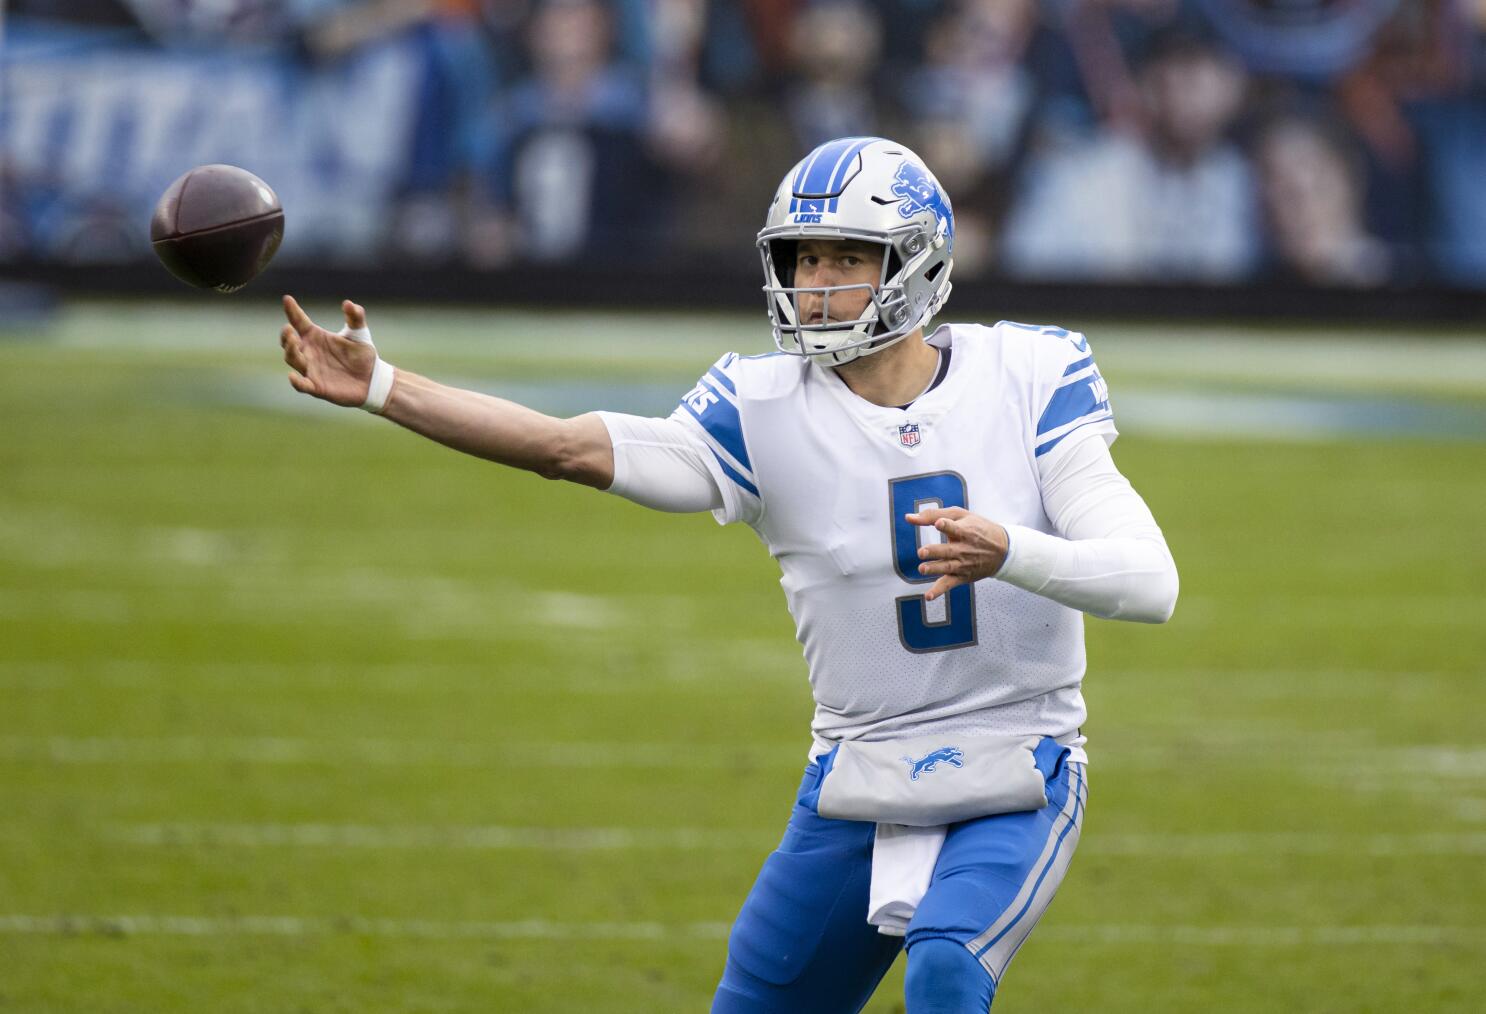 AP sources: Lions trade Stafford to LA for Goff, draft picks - The San  Diego Union-Tribune